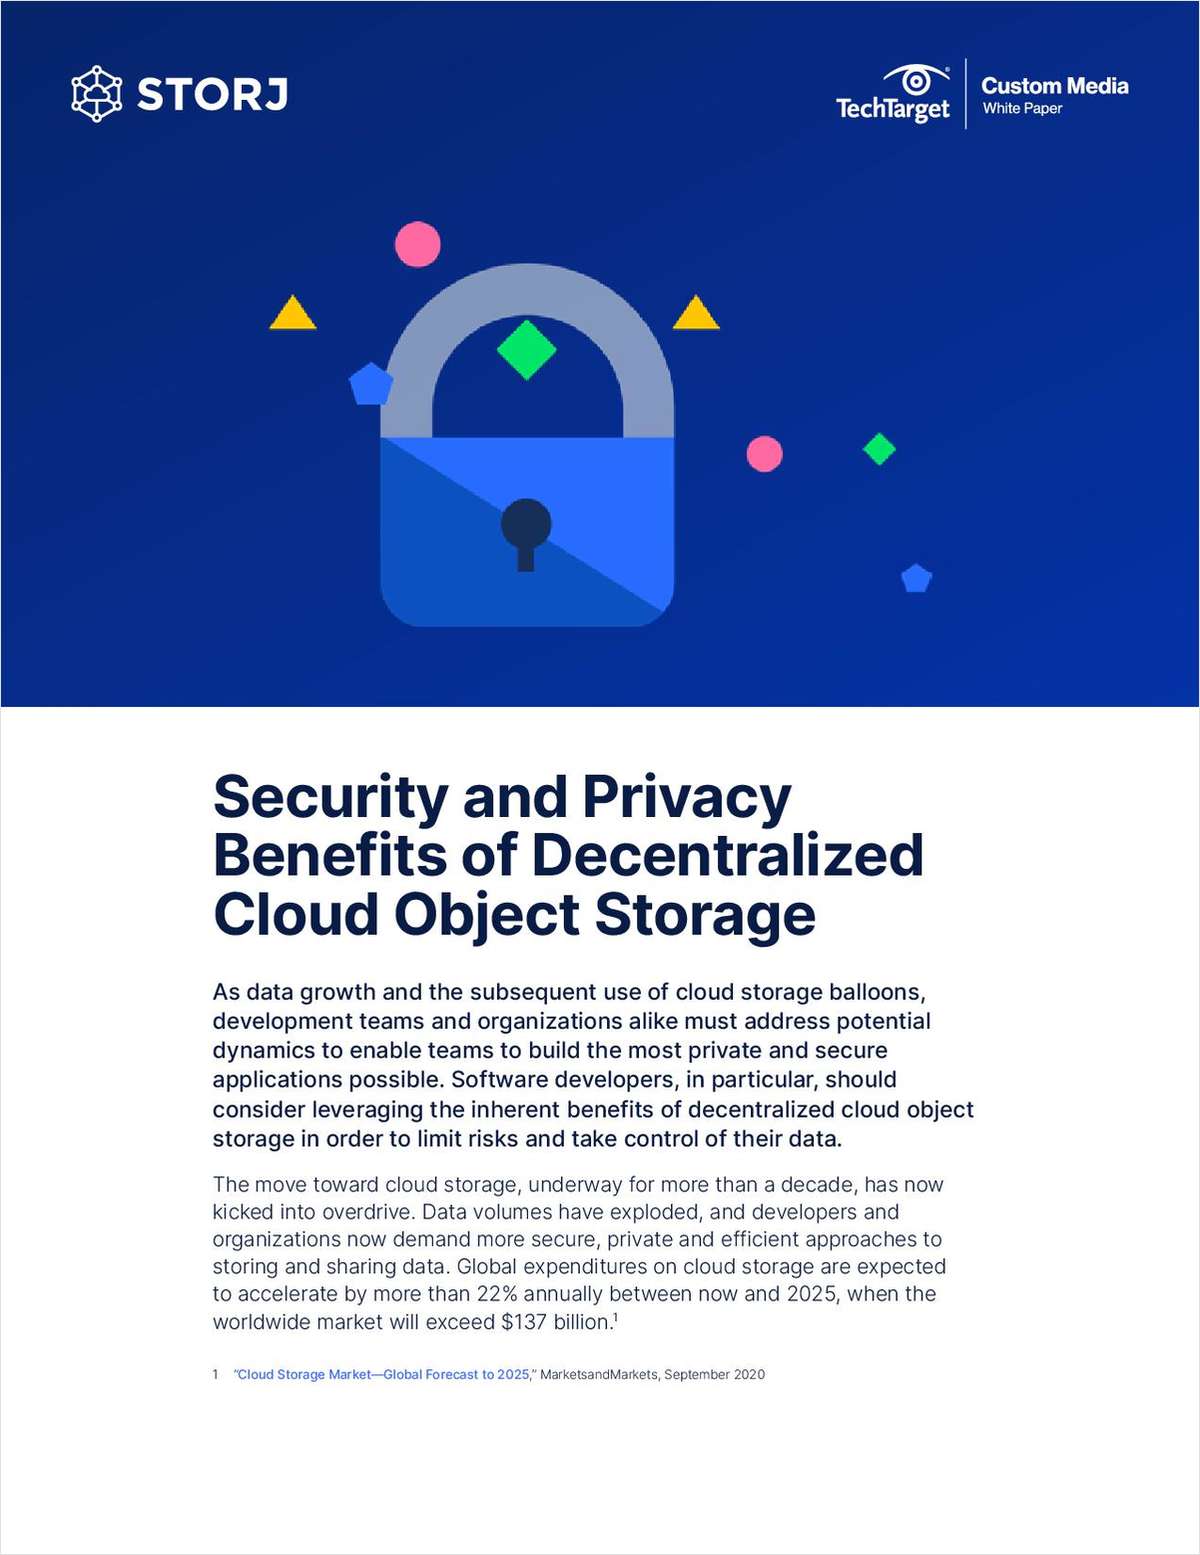 The security & privacy benefits of decentralized cloud storage